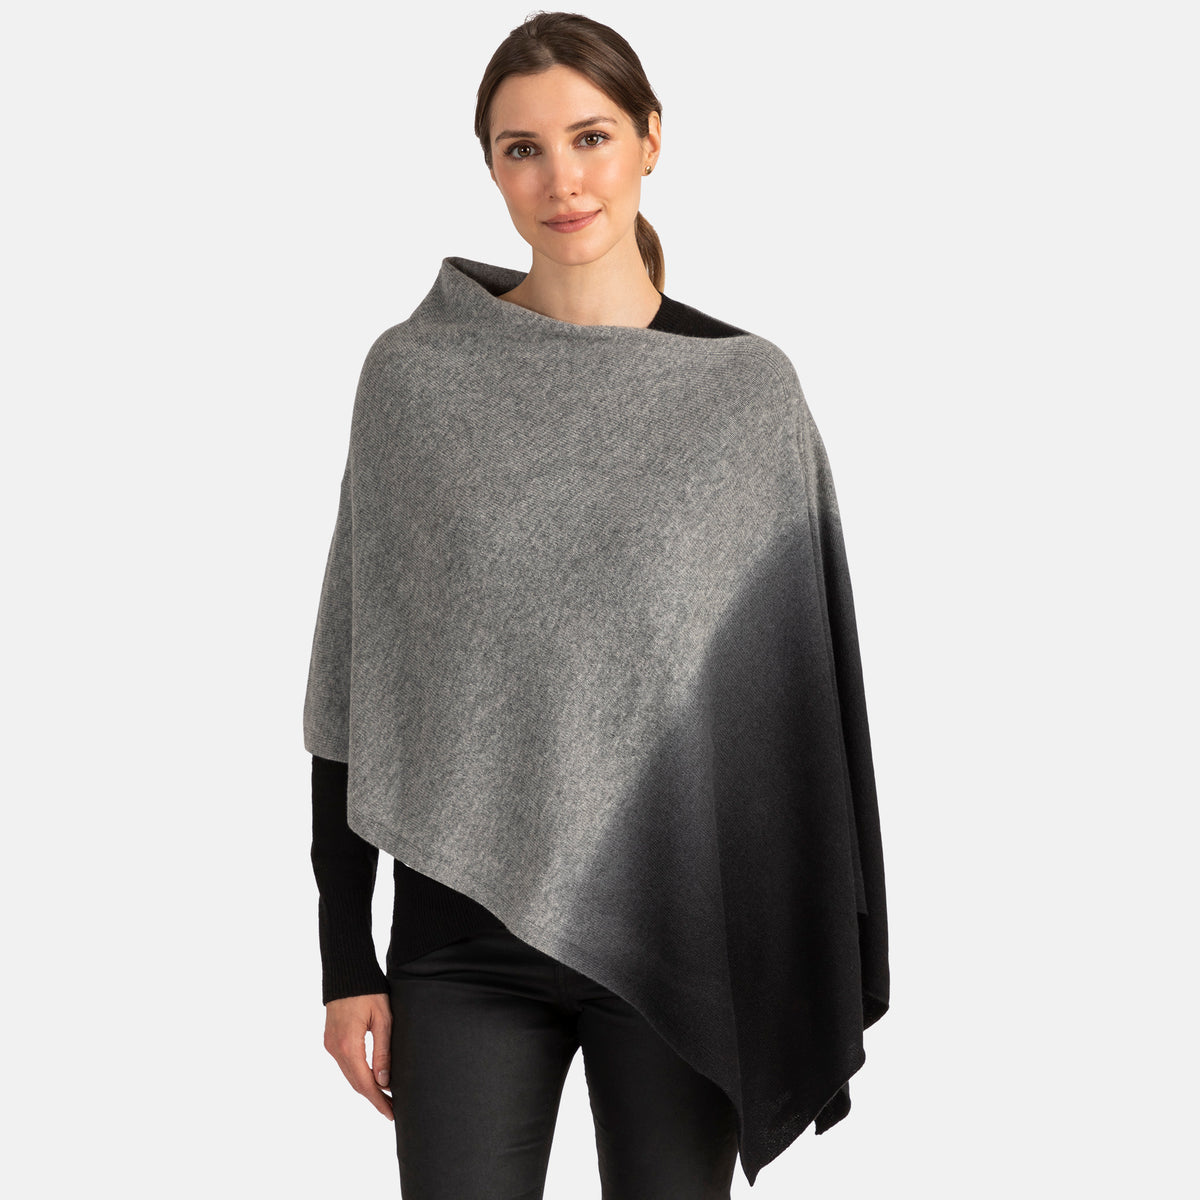 Picture of a woman wearing an assymetrical cashmere knit over the head poncho with dip dye patter in oatmeal and brown.